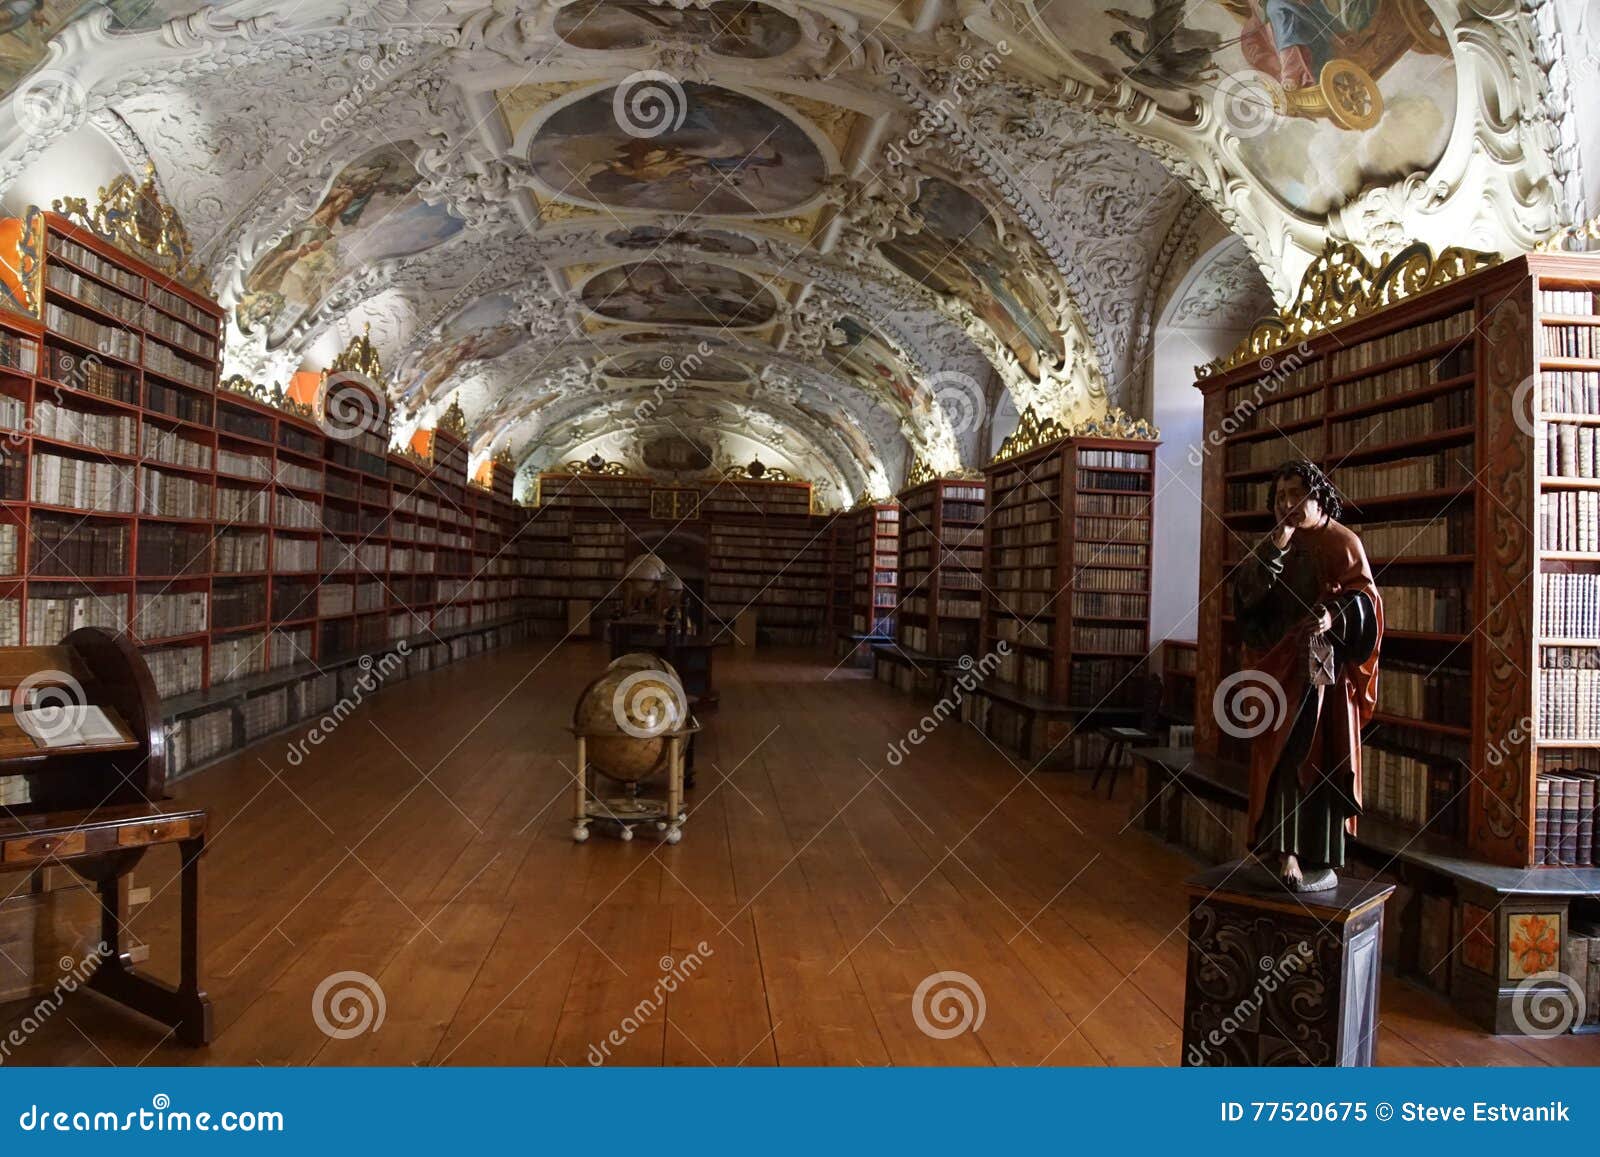 Medieval Library of Strahov Monastery Stock Image - Image of volumes